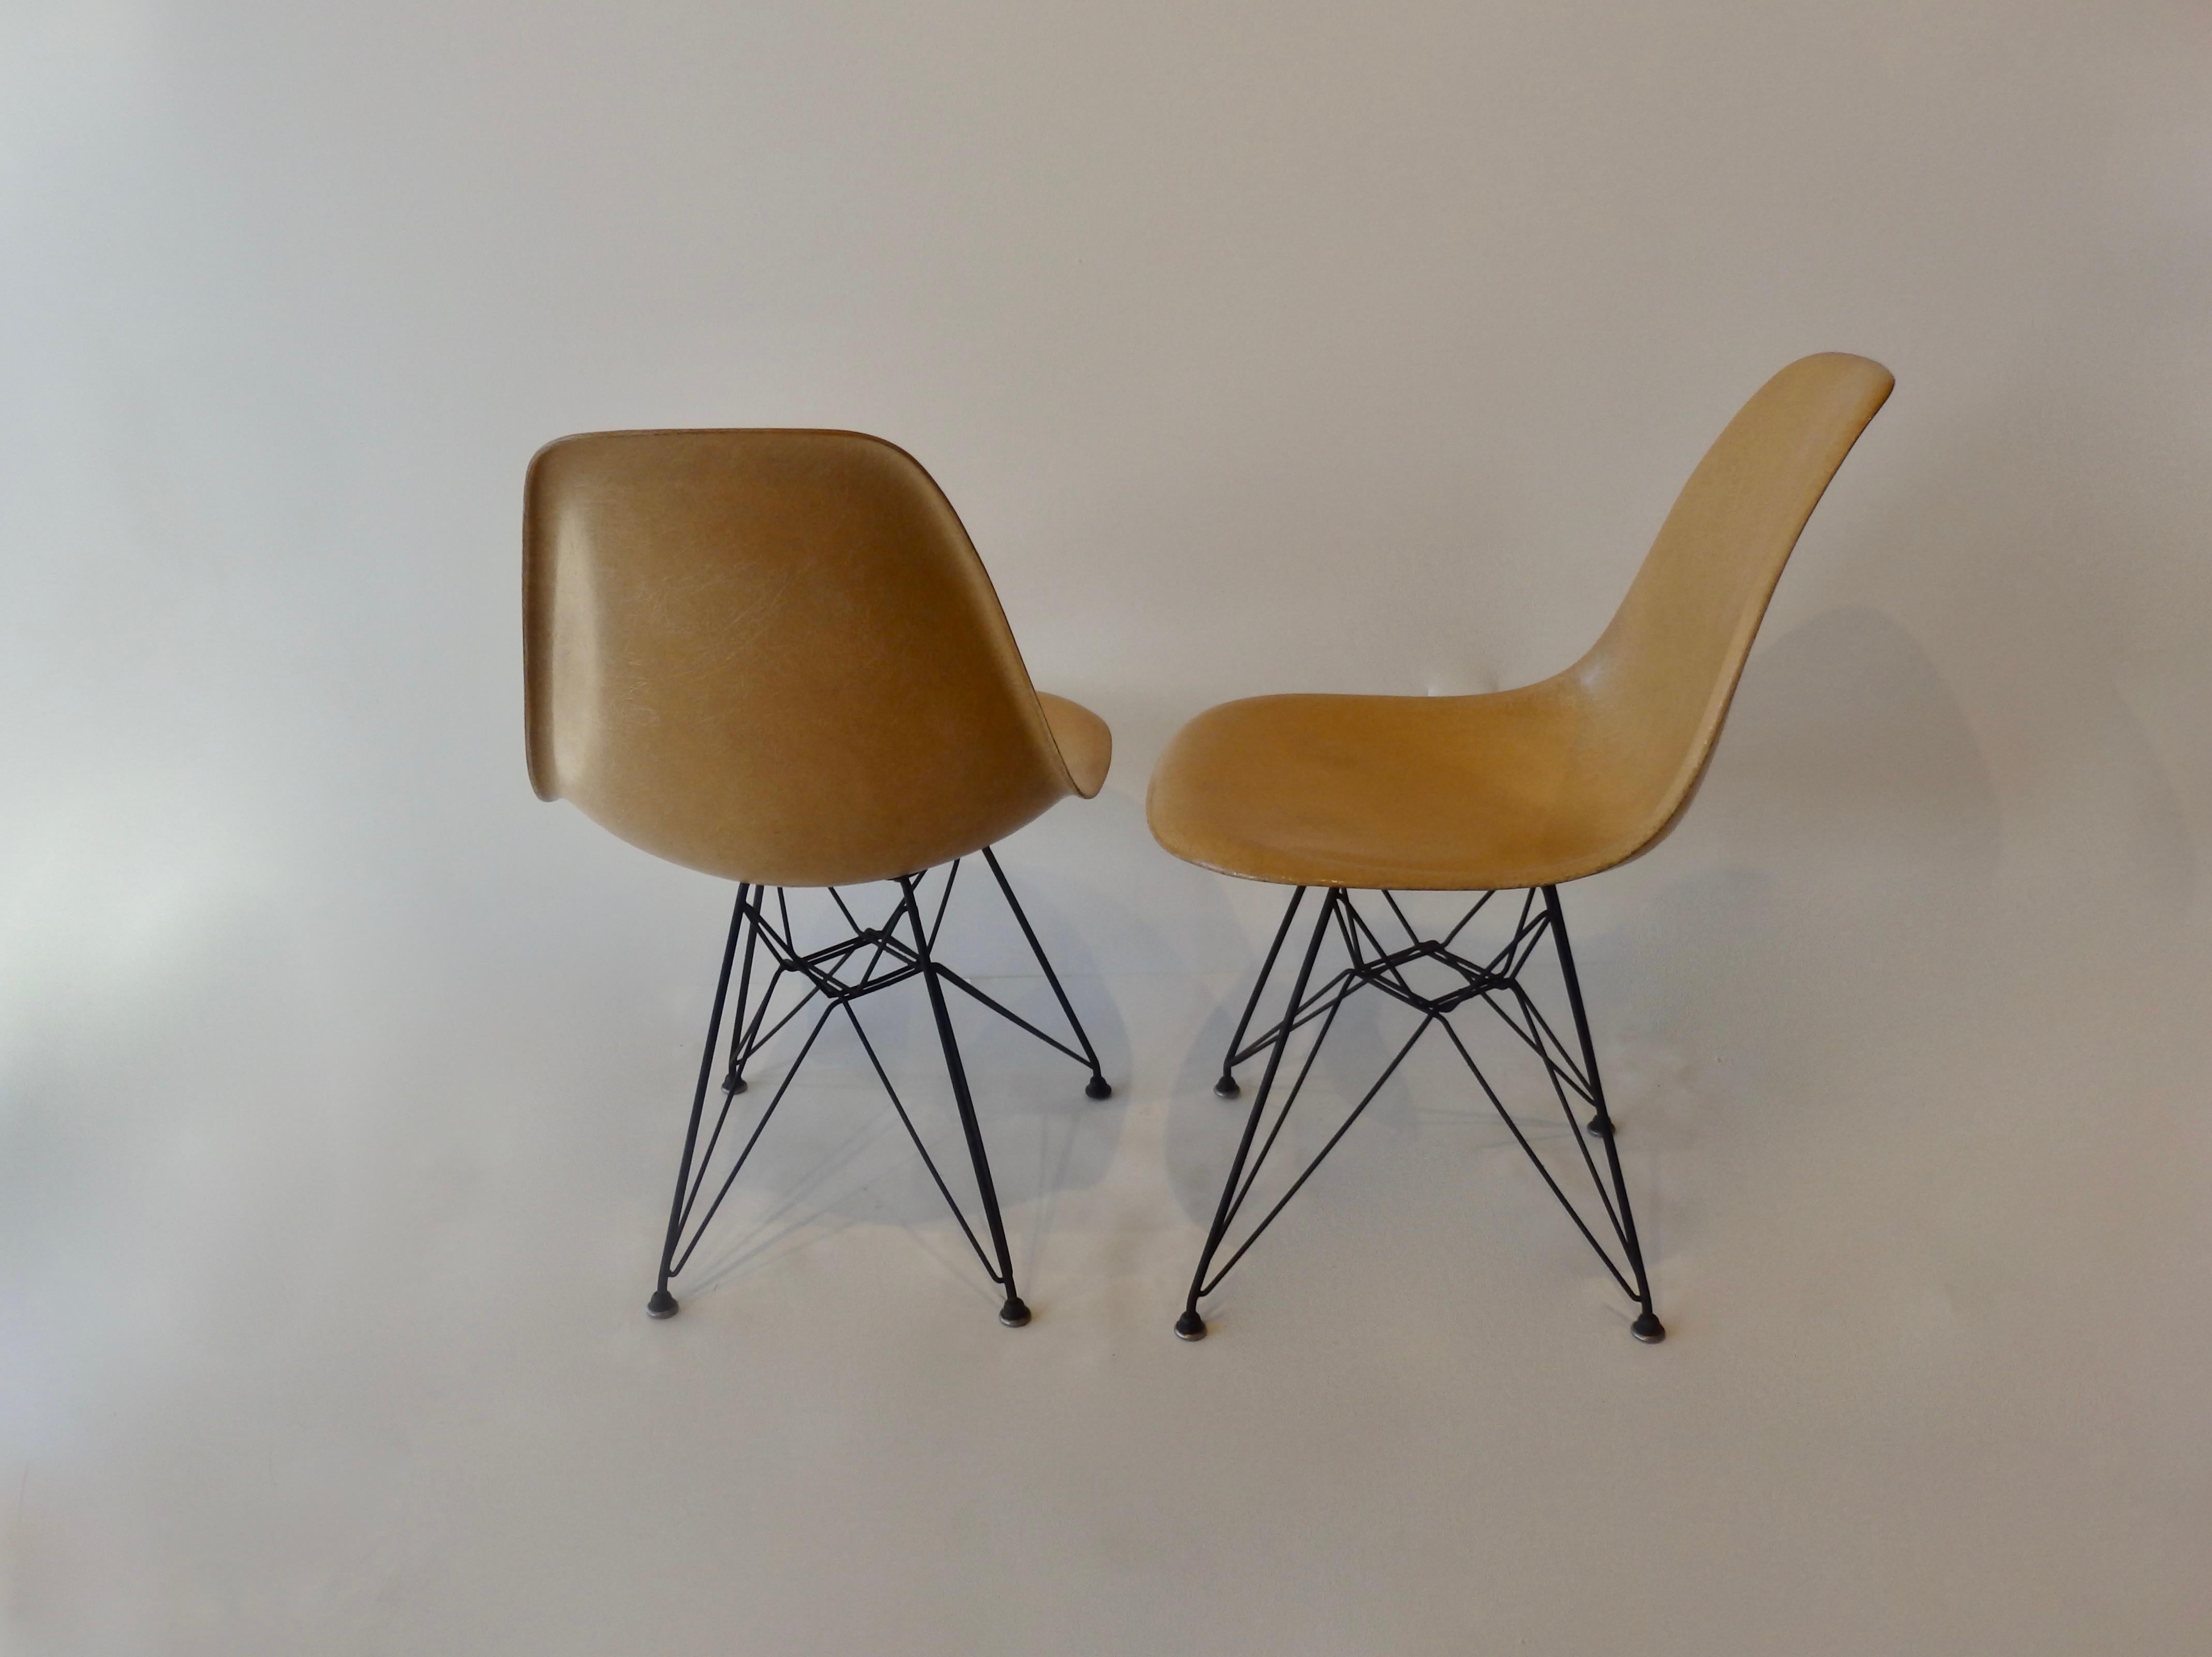 20th Century Pair of Eames Fiberglass DSR Chairs on Eiffel Tower Bases For Sale